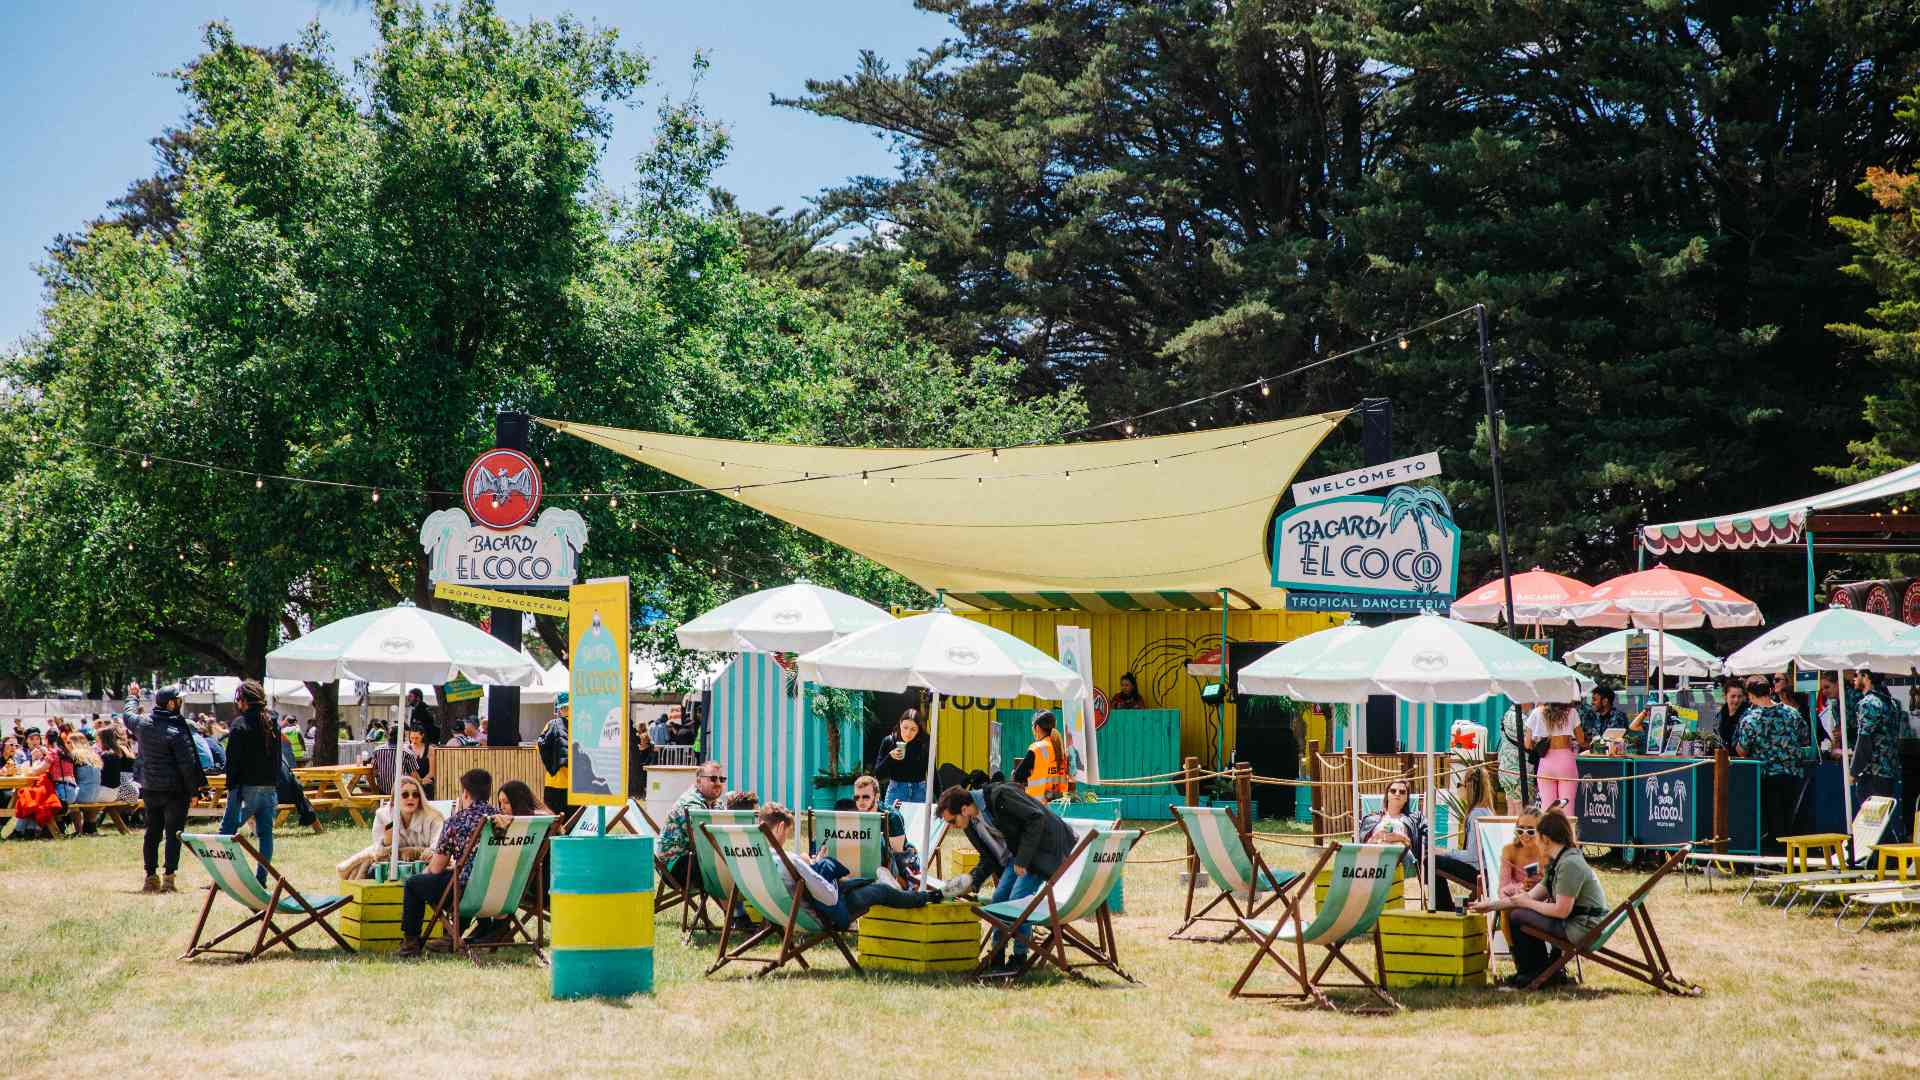 Bacardi Is Giving You and 20 Mates the Chance to Attend Australia's Smallest Music Festival